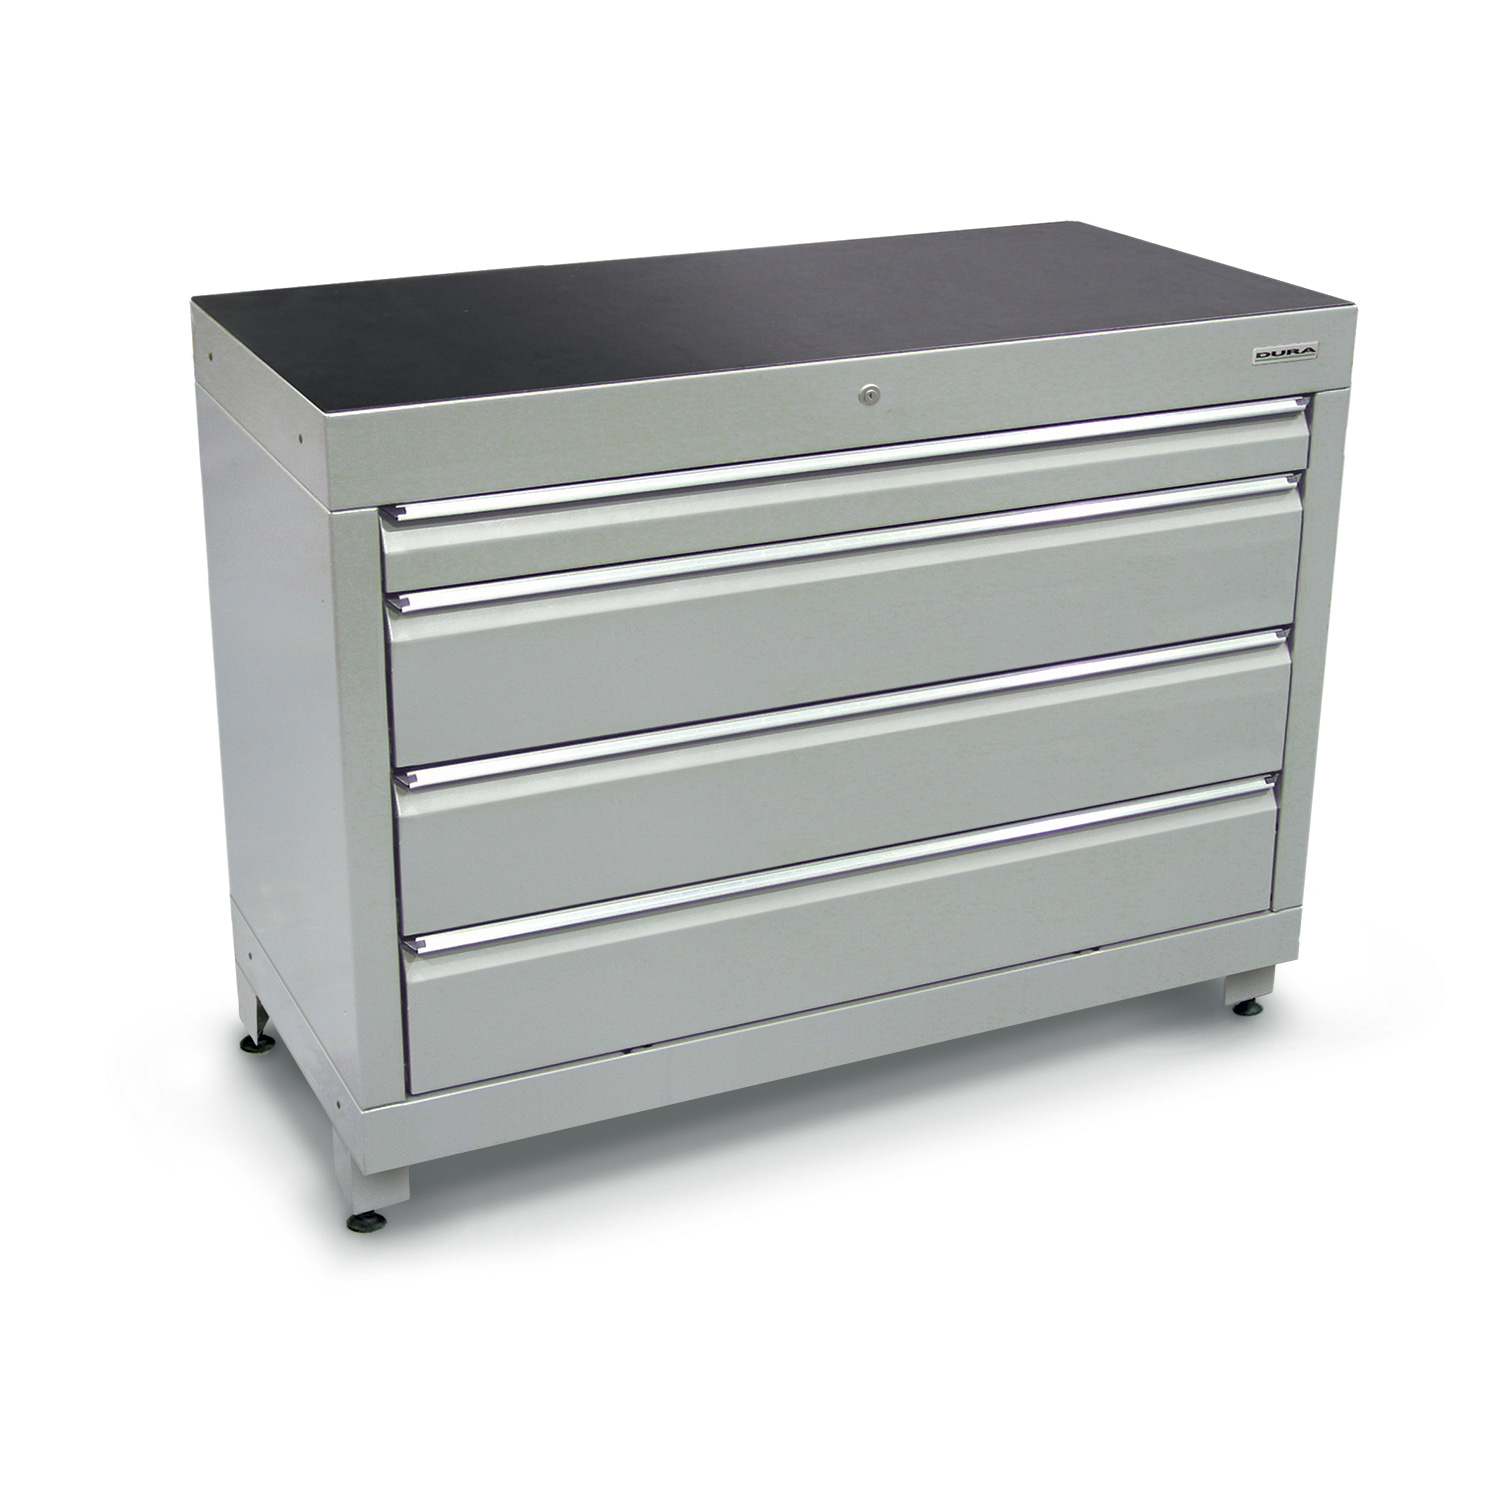 1200 series tool storage cabinet with 4 drawers.